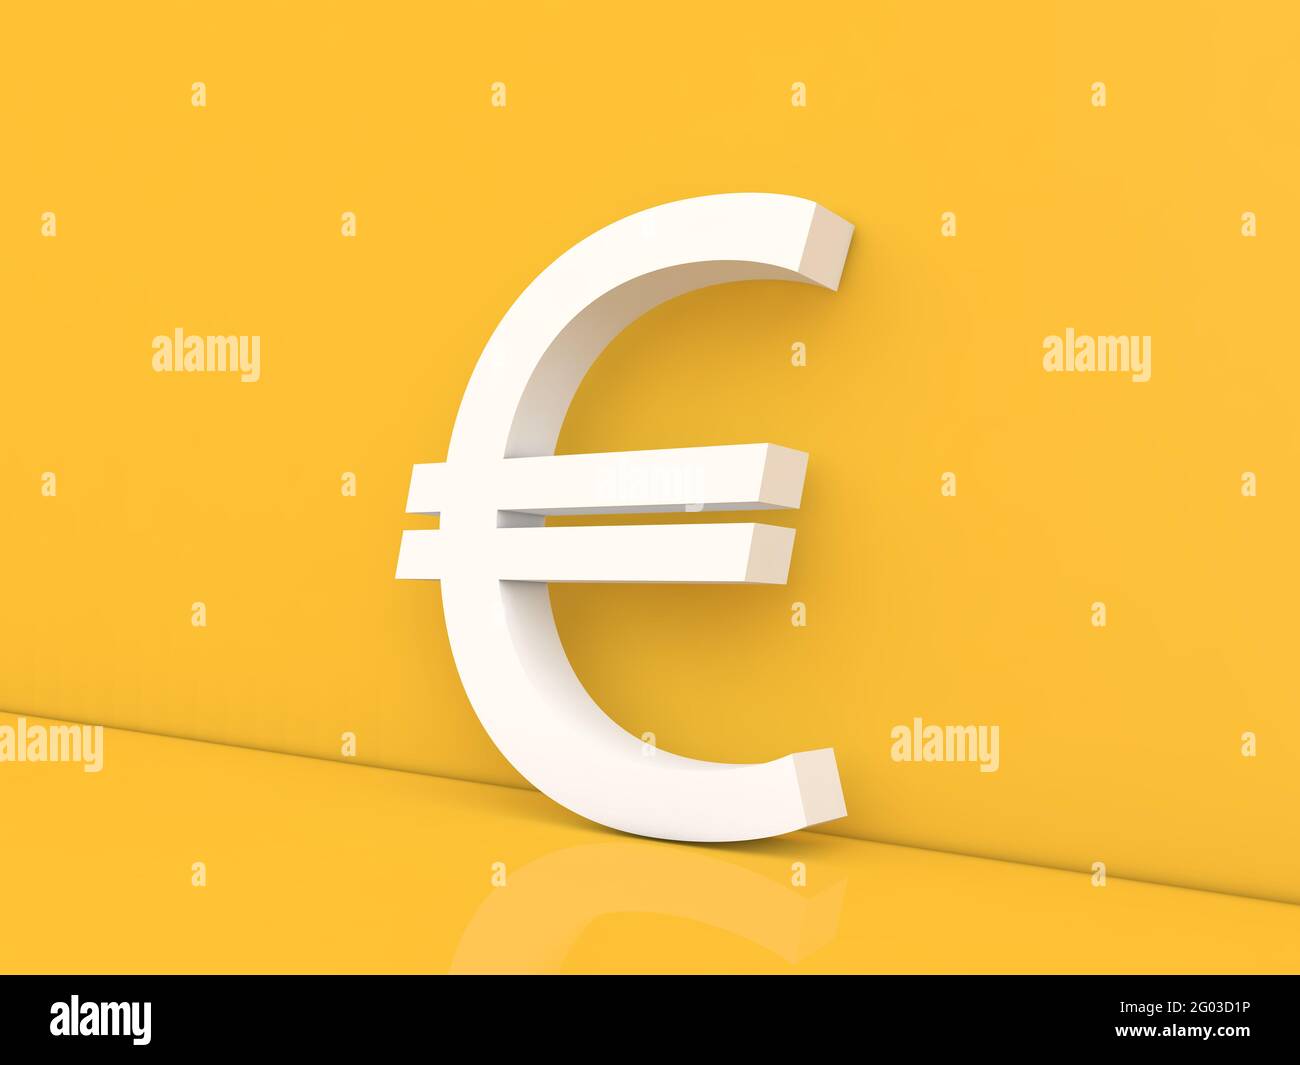 Euro currency sign on a yellow background. 3d render illustration. Stock Photo